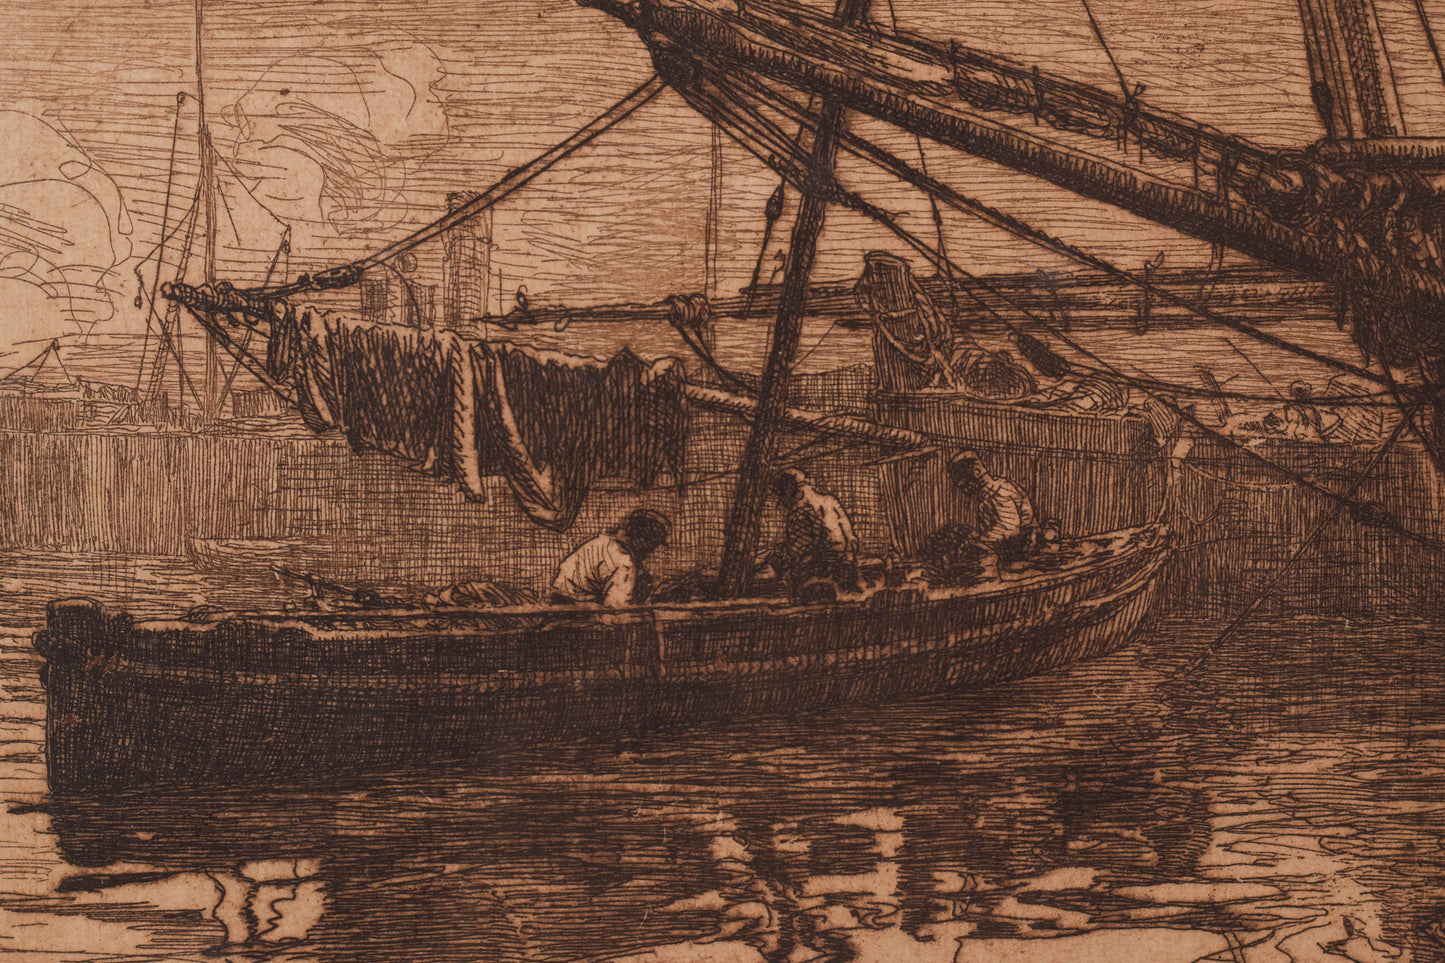 Etching of Boats